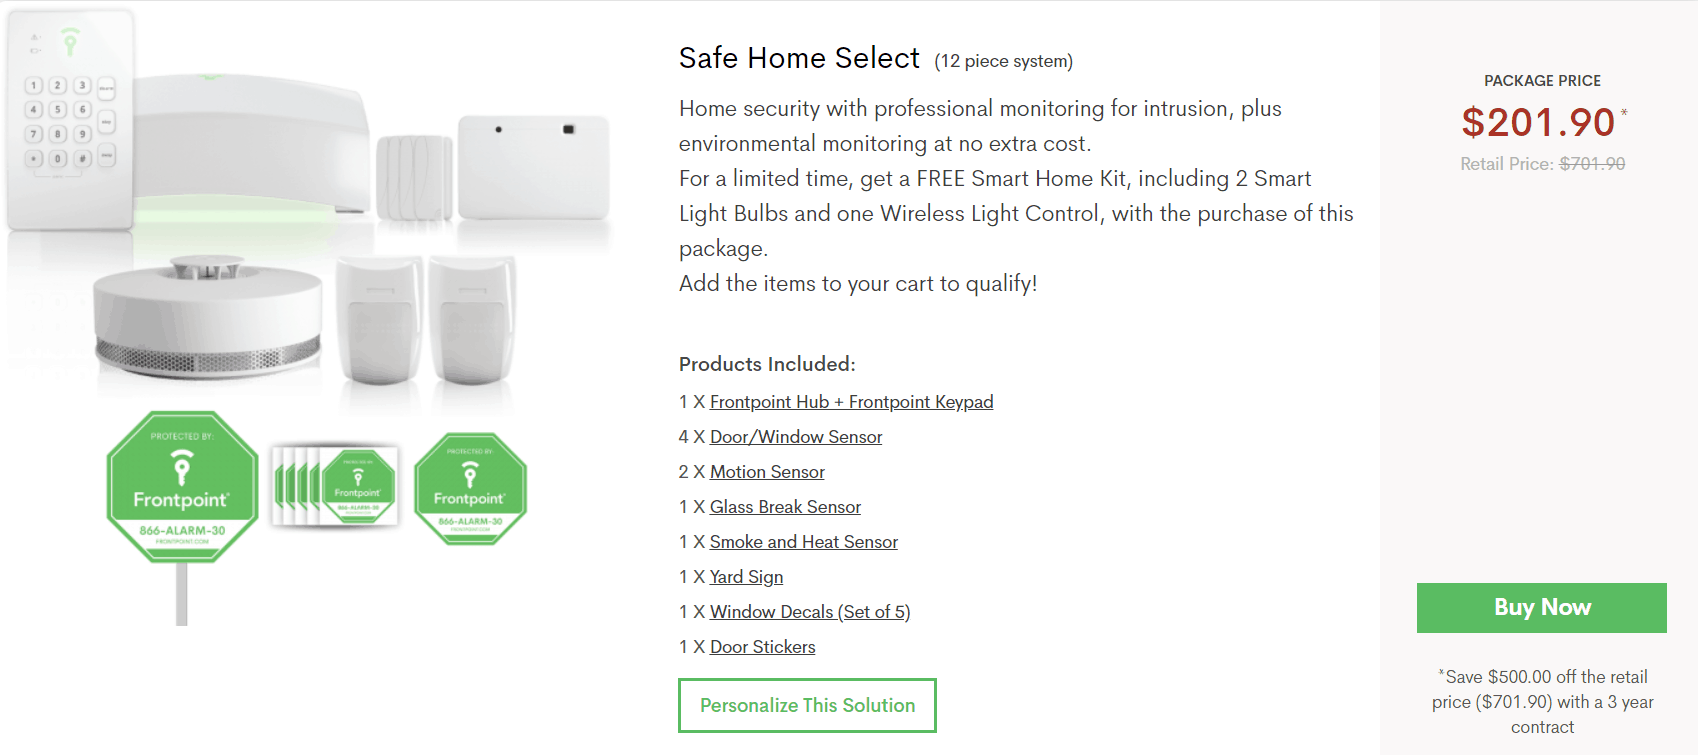 Safe Home Select Package